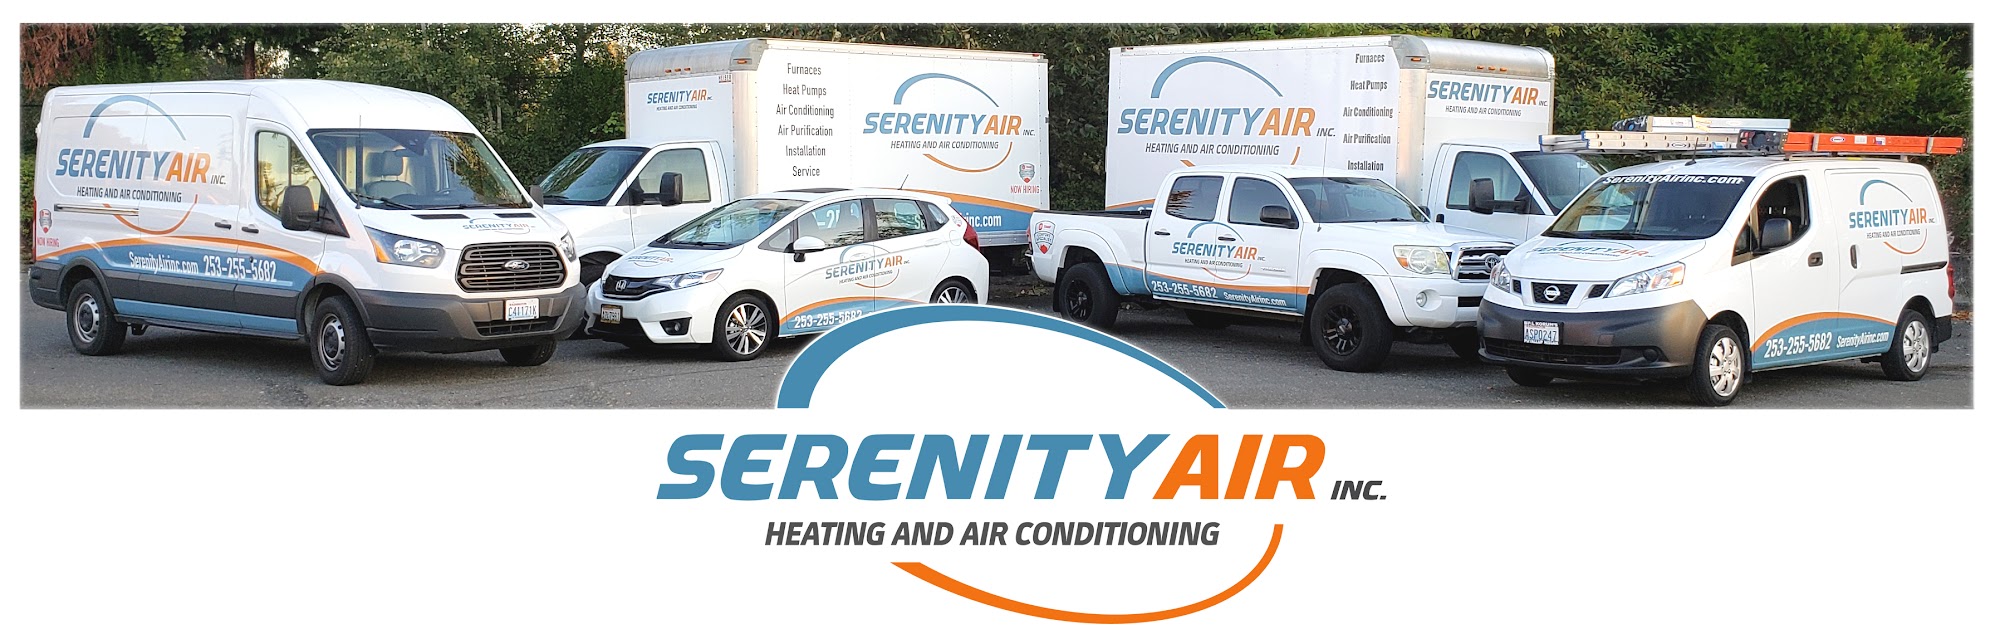 Serenity Air Heating and Air Conditioning